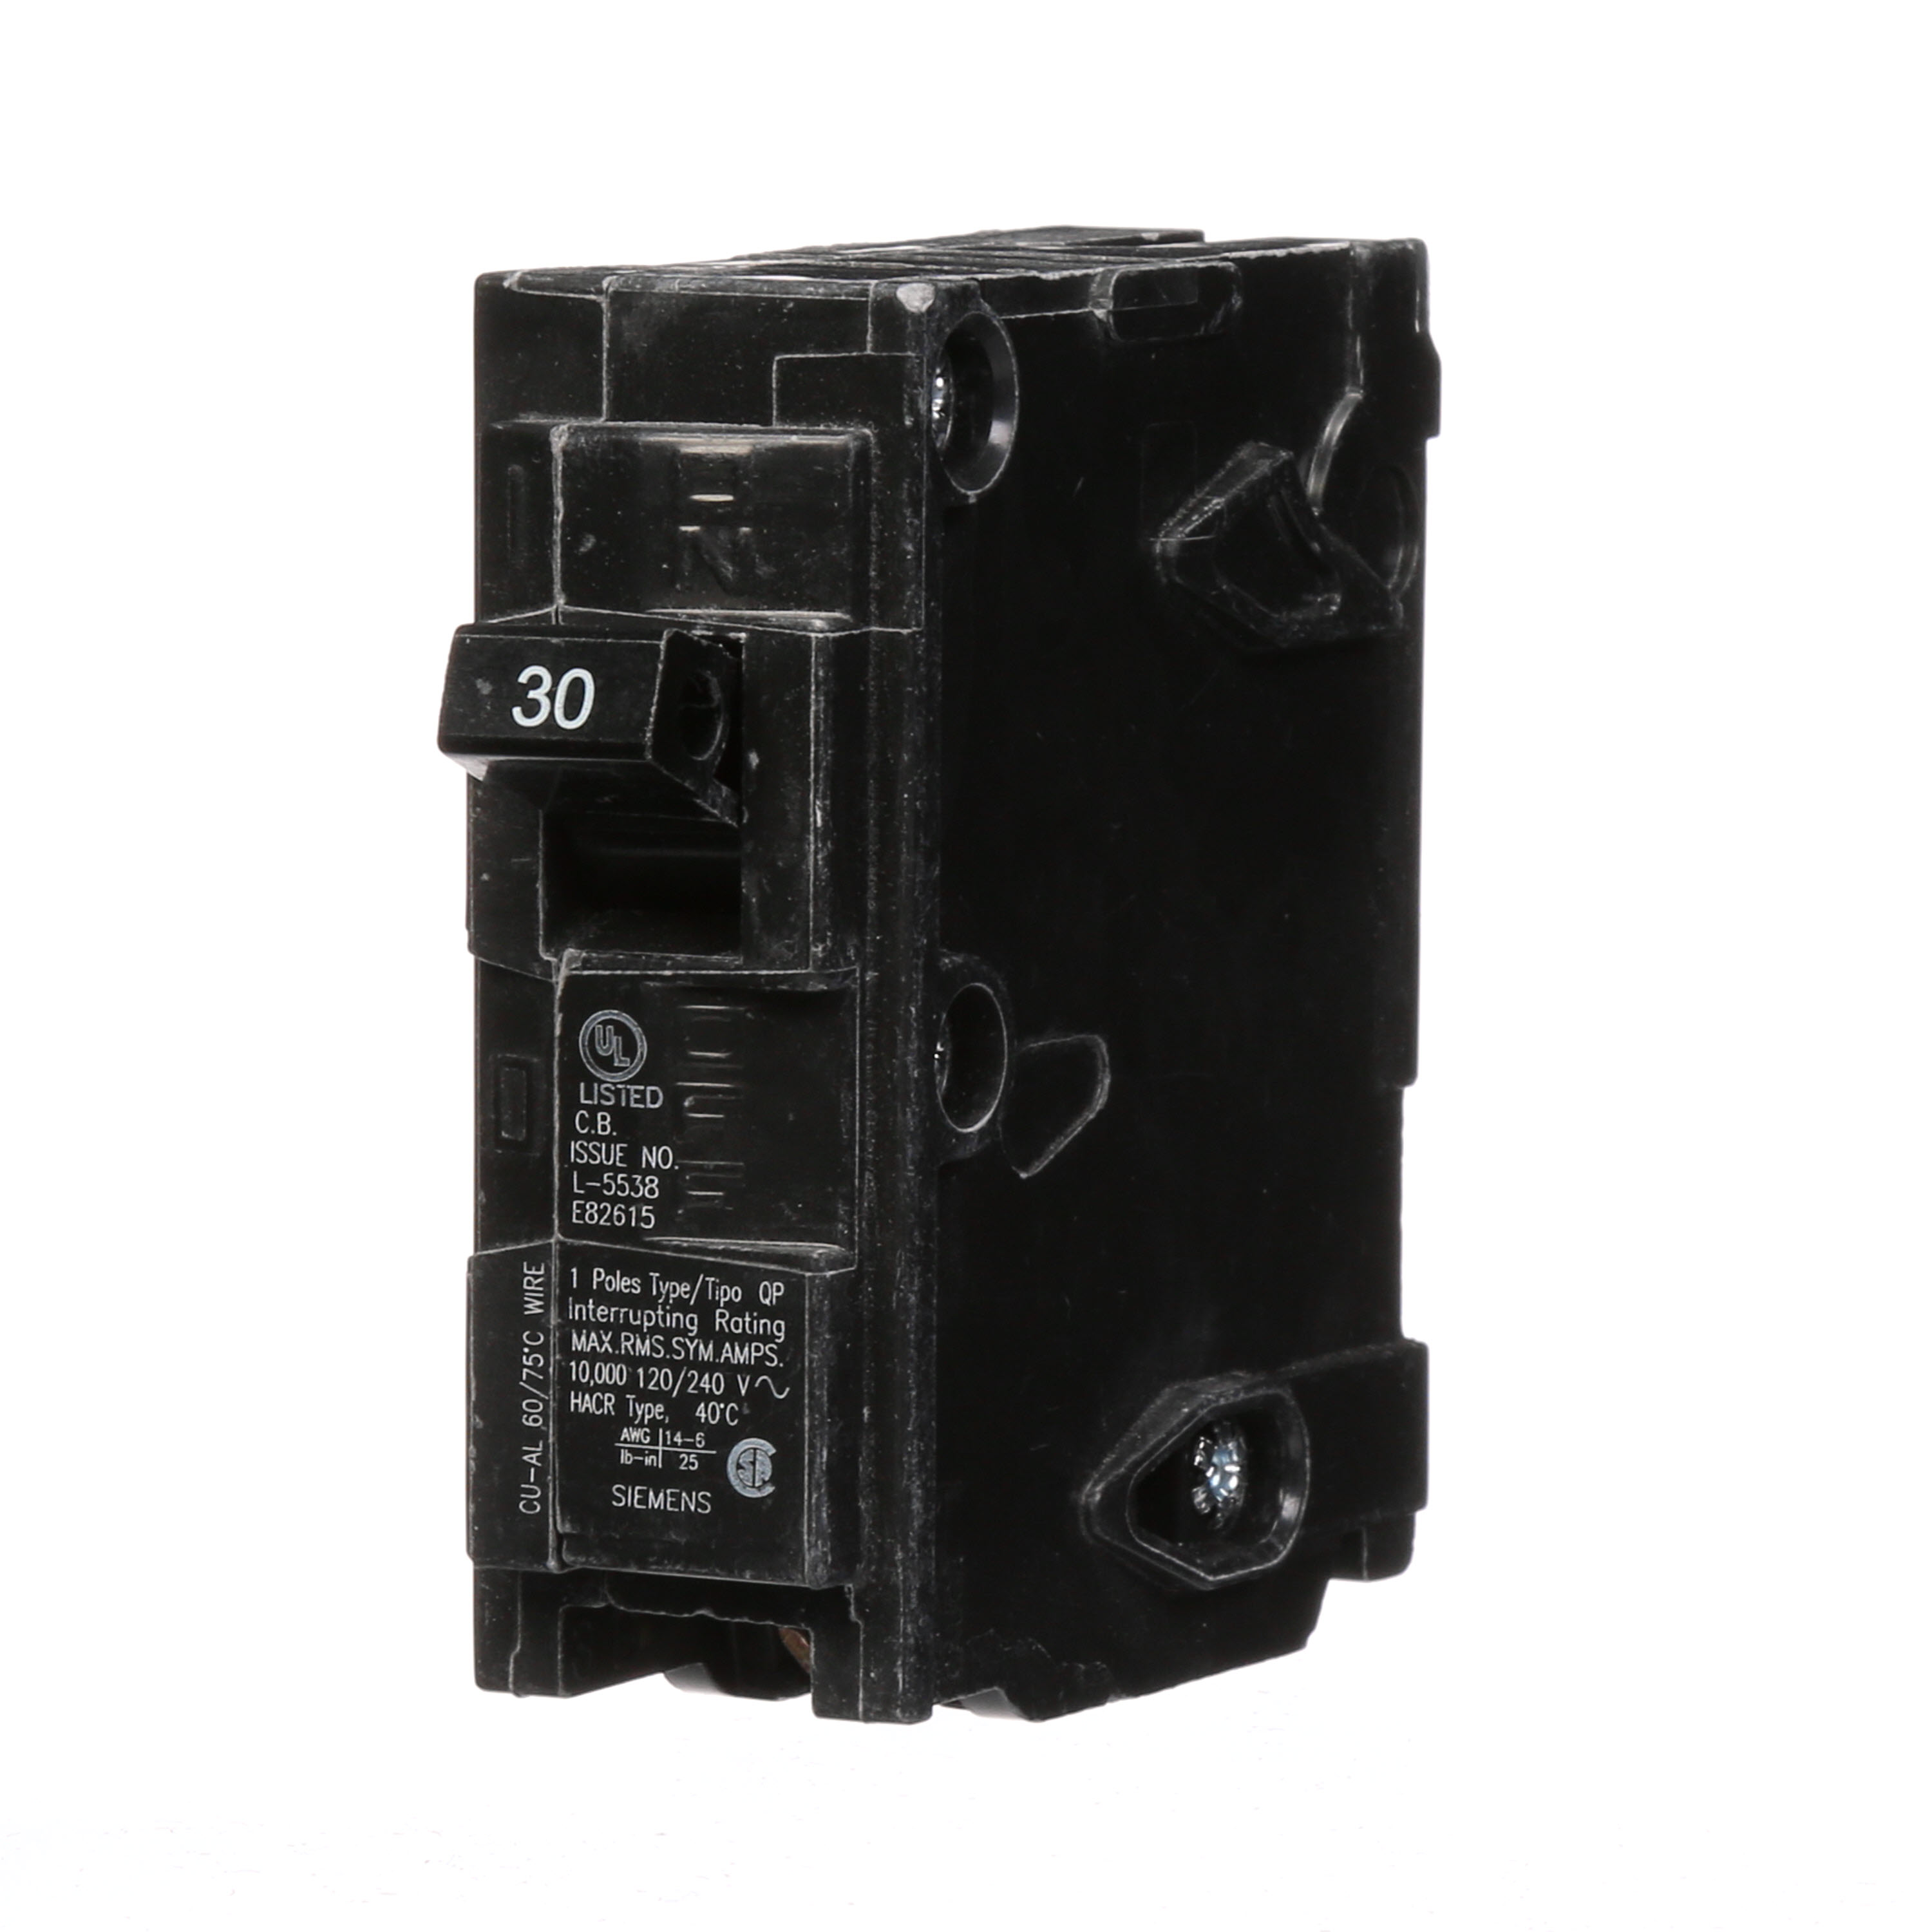 Siemens Low Voltage Residential Circuit Breakers Miniature Thermal Mag Circuit Breakers - Type QP/MP 1-pole 10k are Circuit Protection Load Center Mains, Feeders, and Miniature Circuit Breakers. BREAKER 30A 1P 120V 10K QP